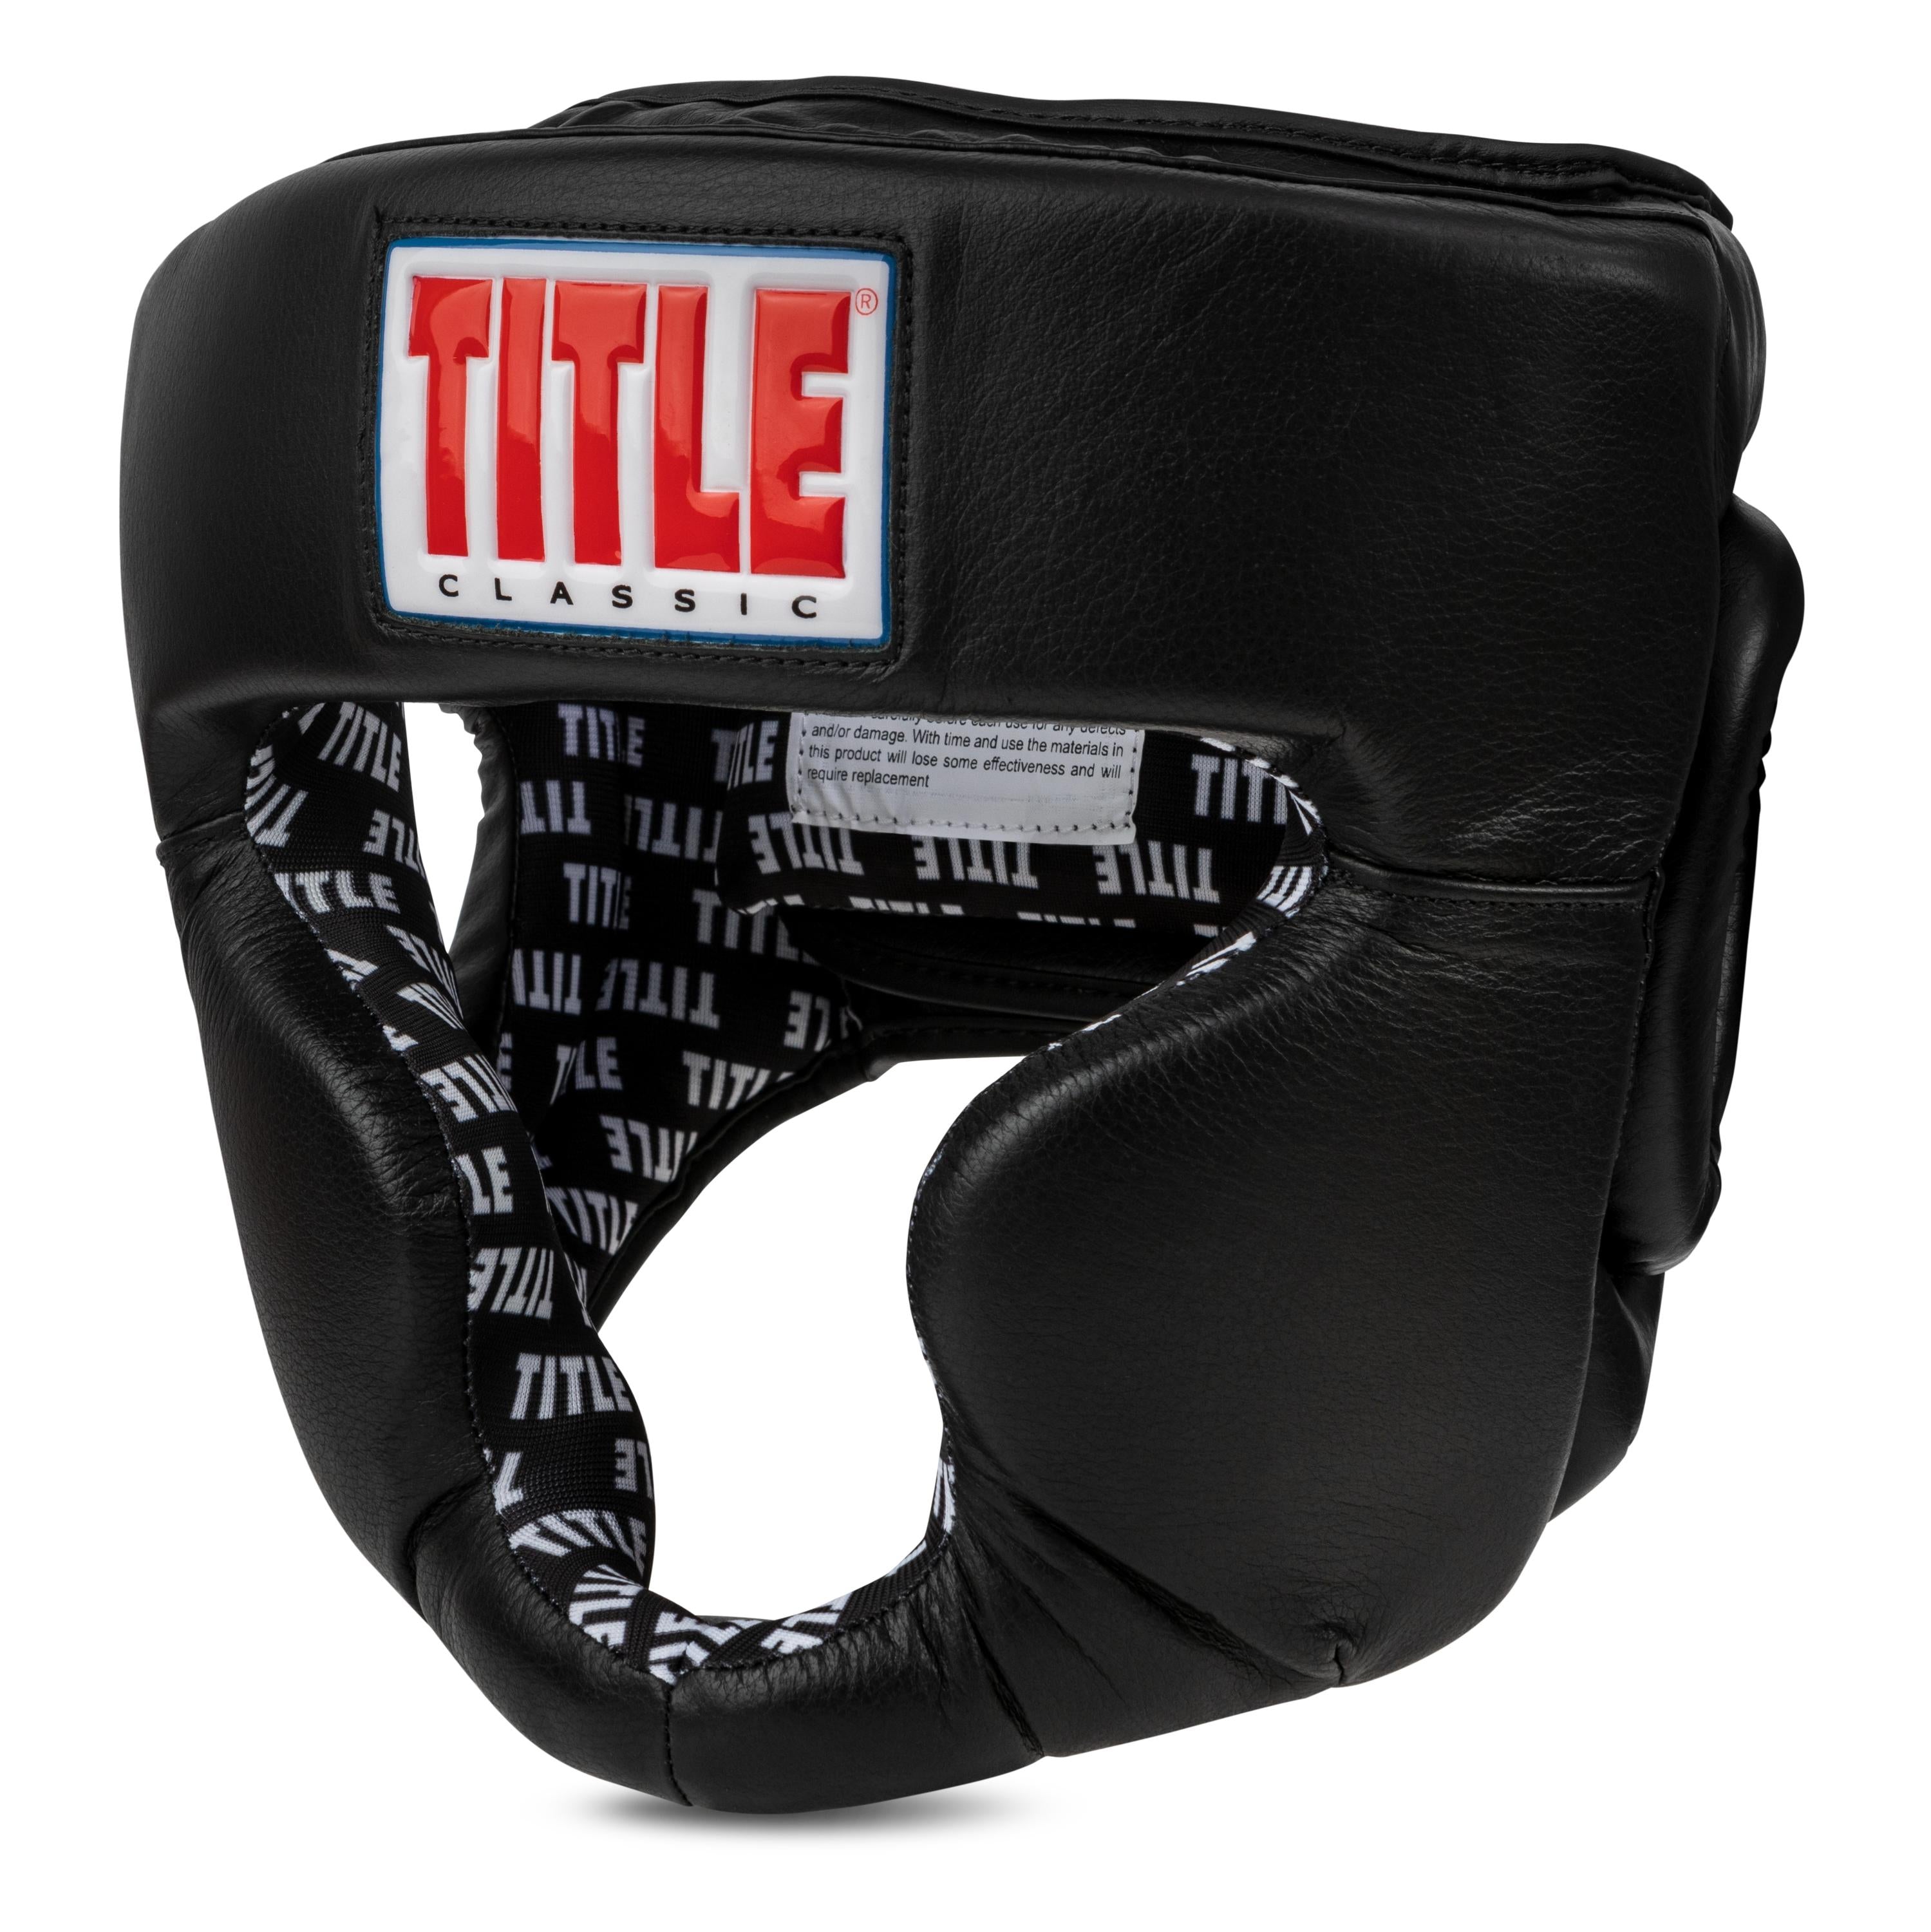 TITLE Boxing Fast Feet Trainer